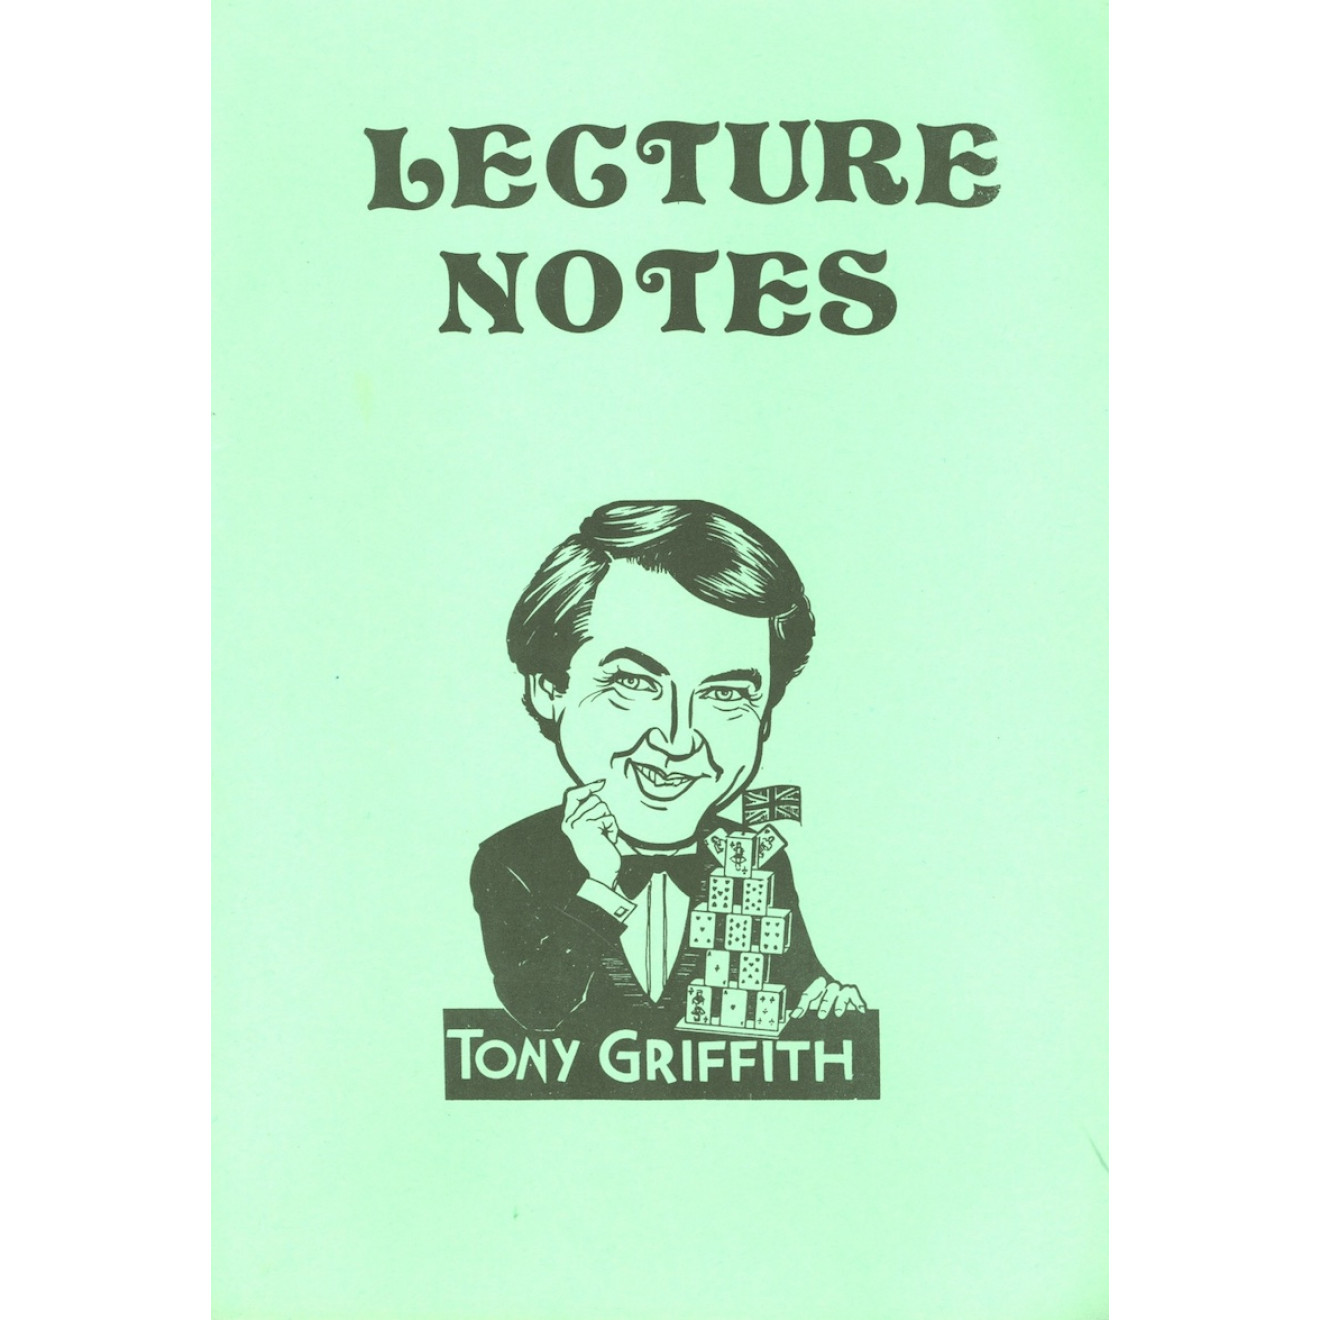 Lecture Notes Tony Griffith